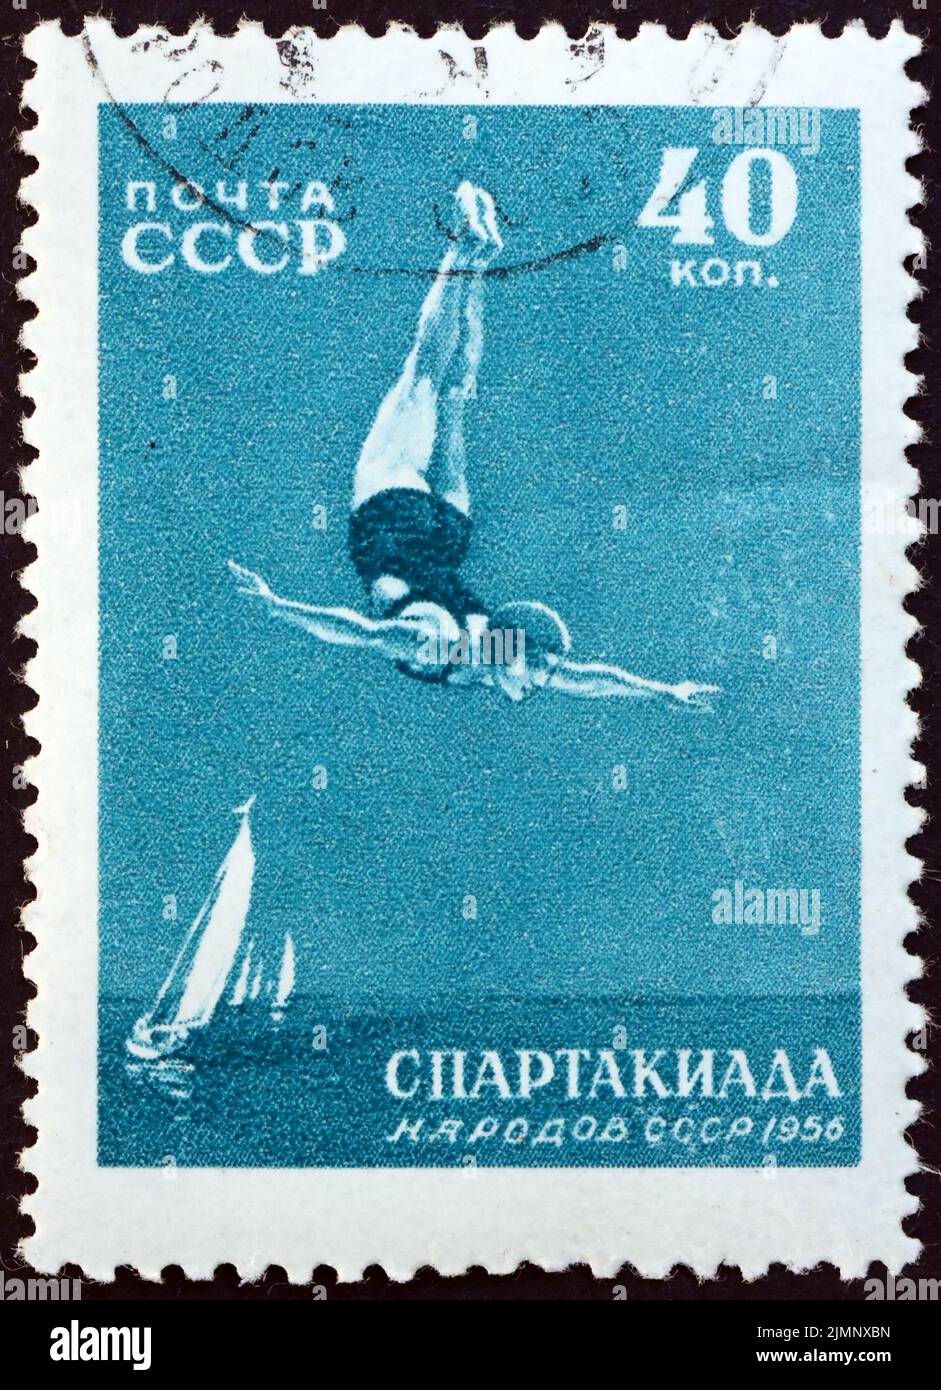 RUSSIA - CIRCA 1956: a stamp printed in Russia shows Diving, All-Union Spartacist Games, Moscow, circa 1956 Stock Photo